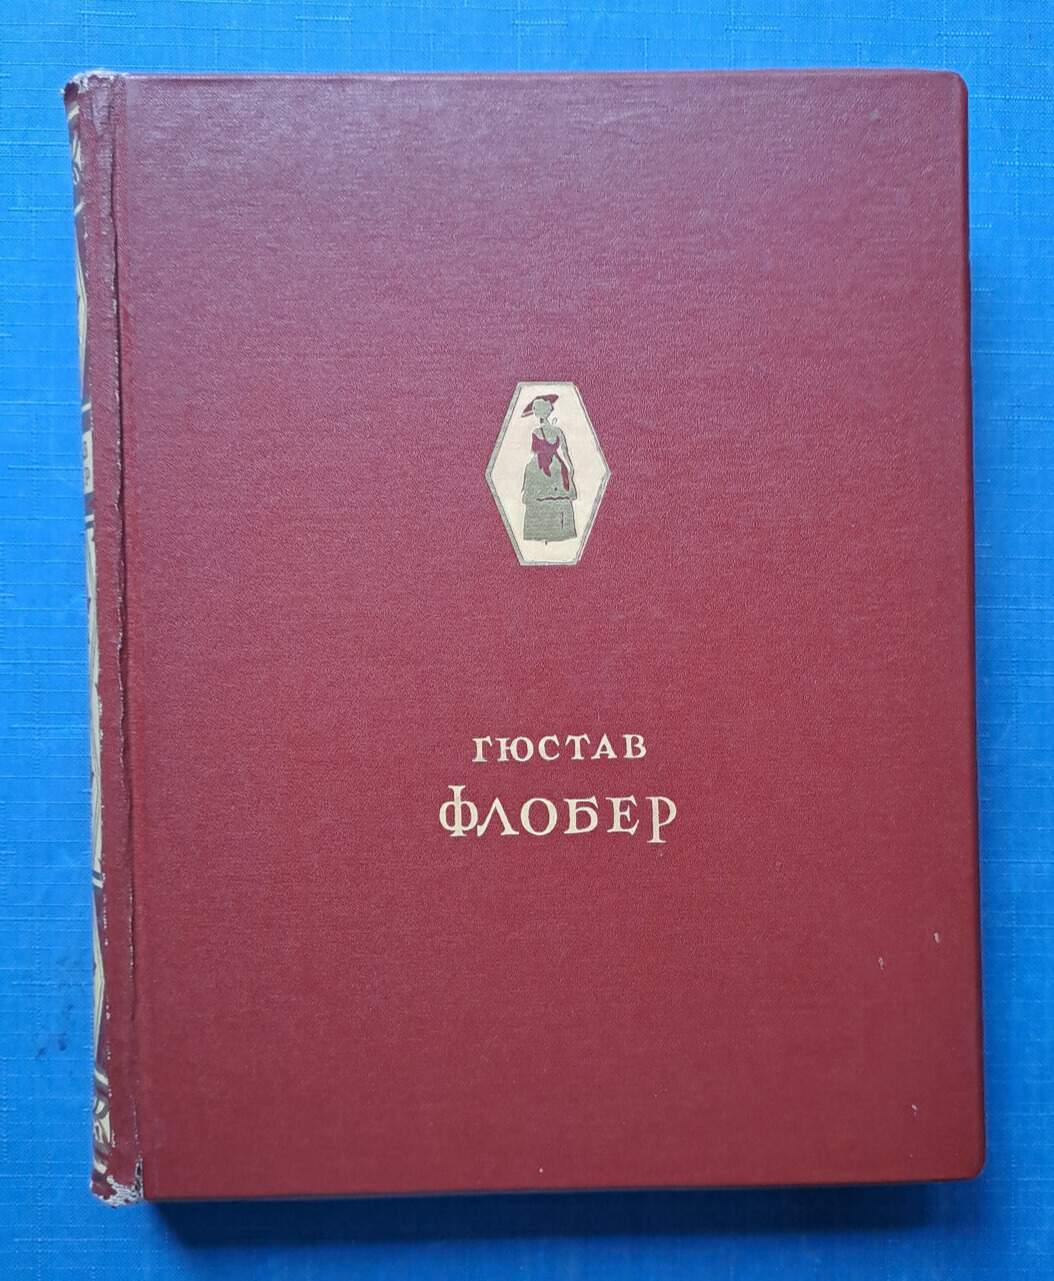 1947 Gustave Flaubert Selected Works Madame Bovary illustrated Russian book